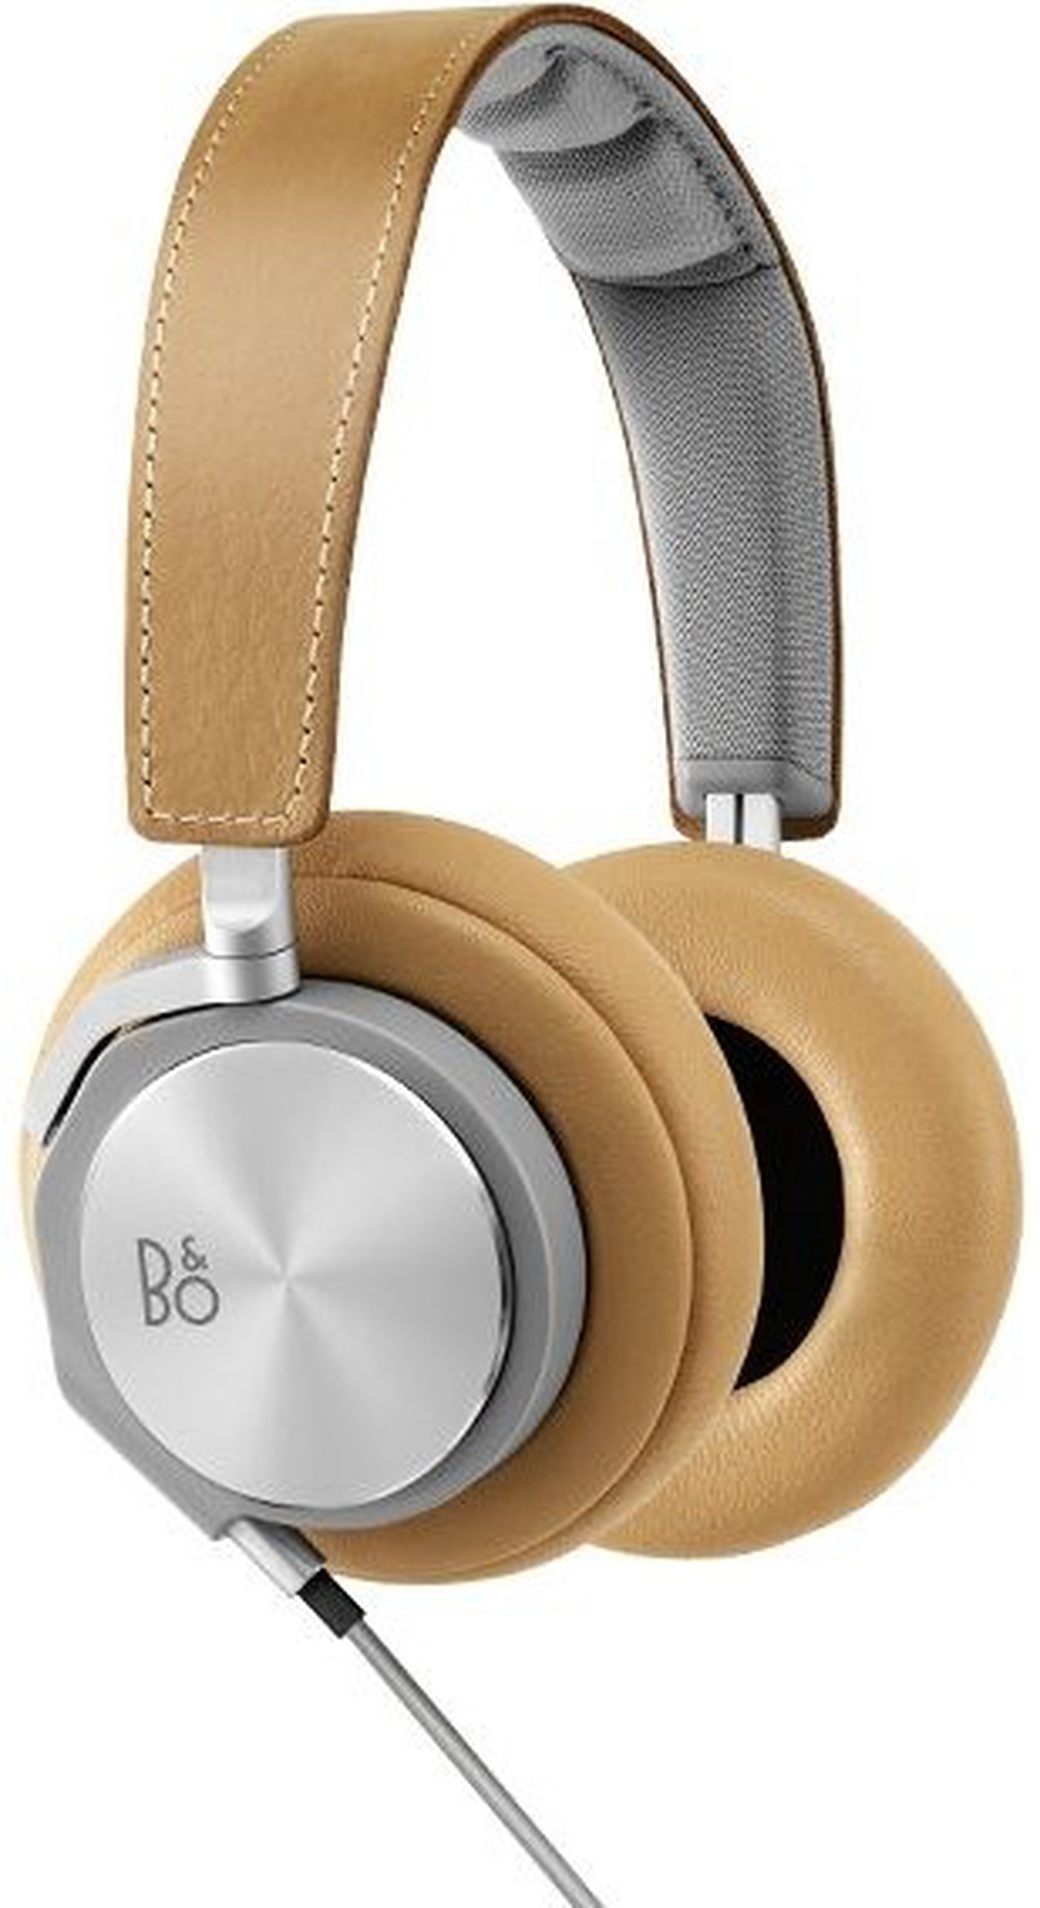 Наушники Bang & Olufsen BeoPlay H6 Natural Leather фото